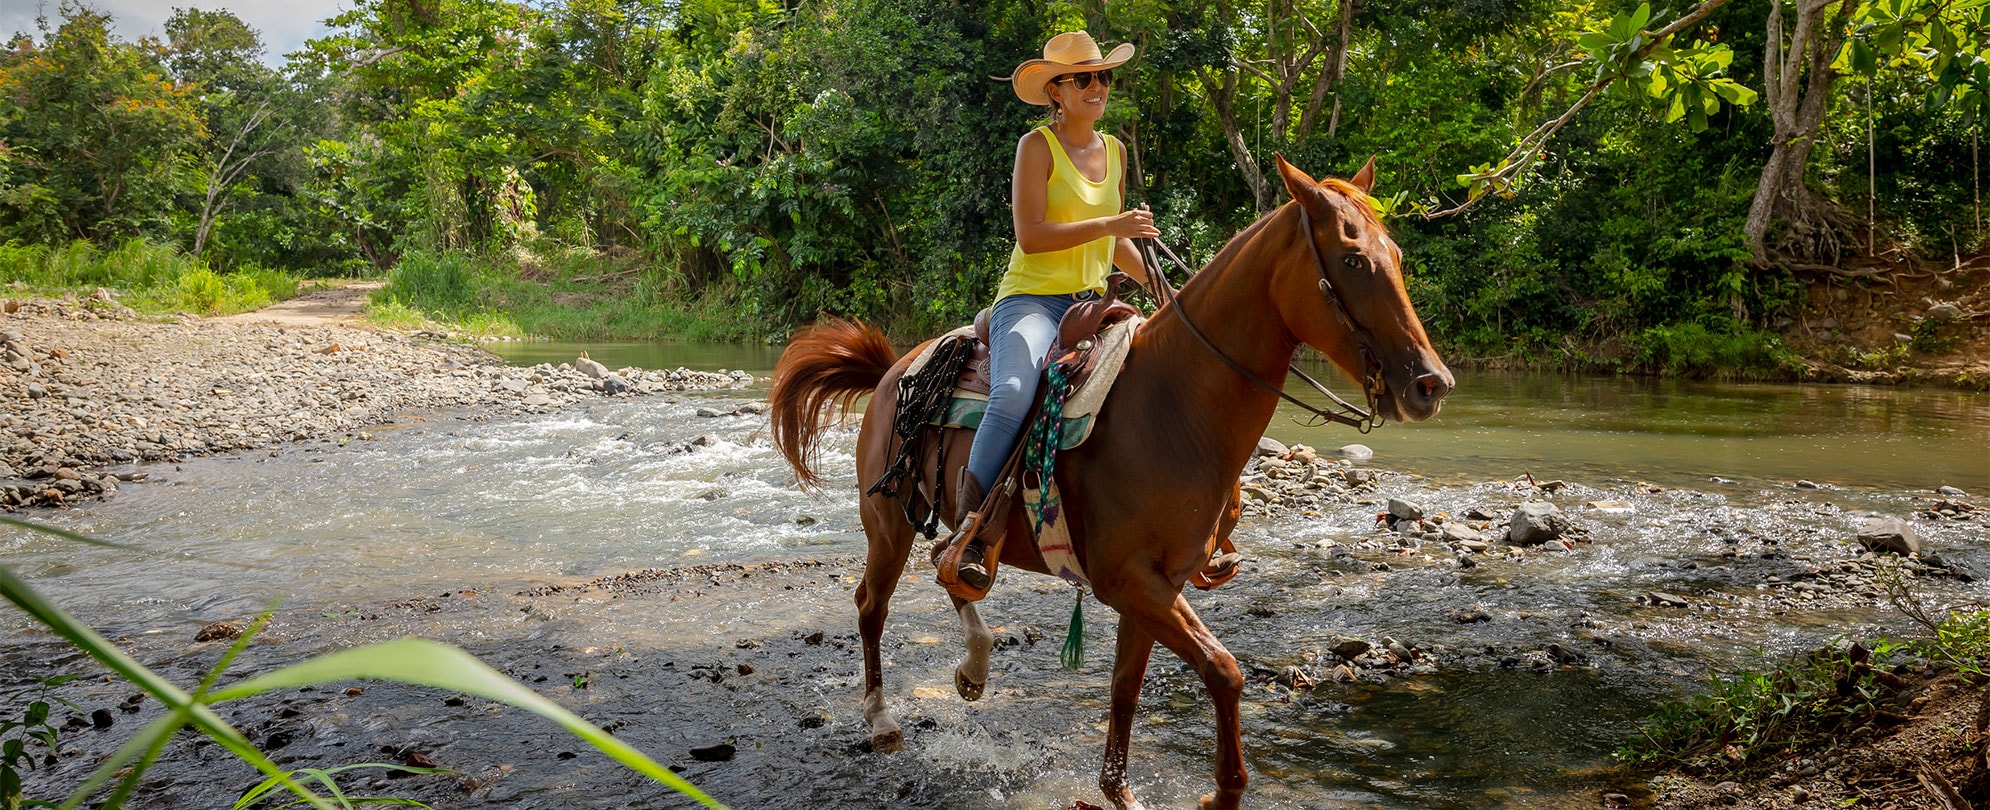 Woman wearing a yellow tank top and a wide-brimmed hat riding a horse through a rocky river. 